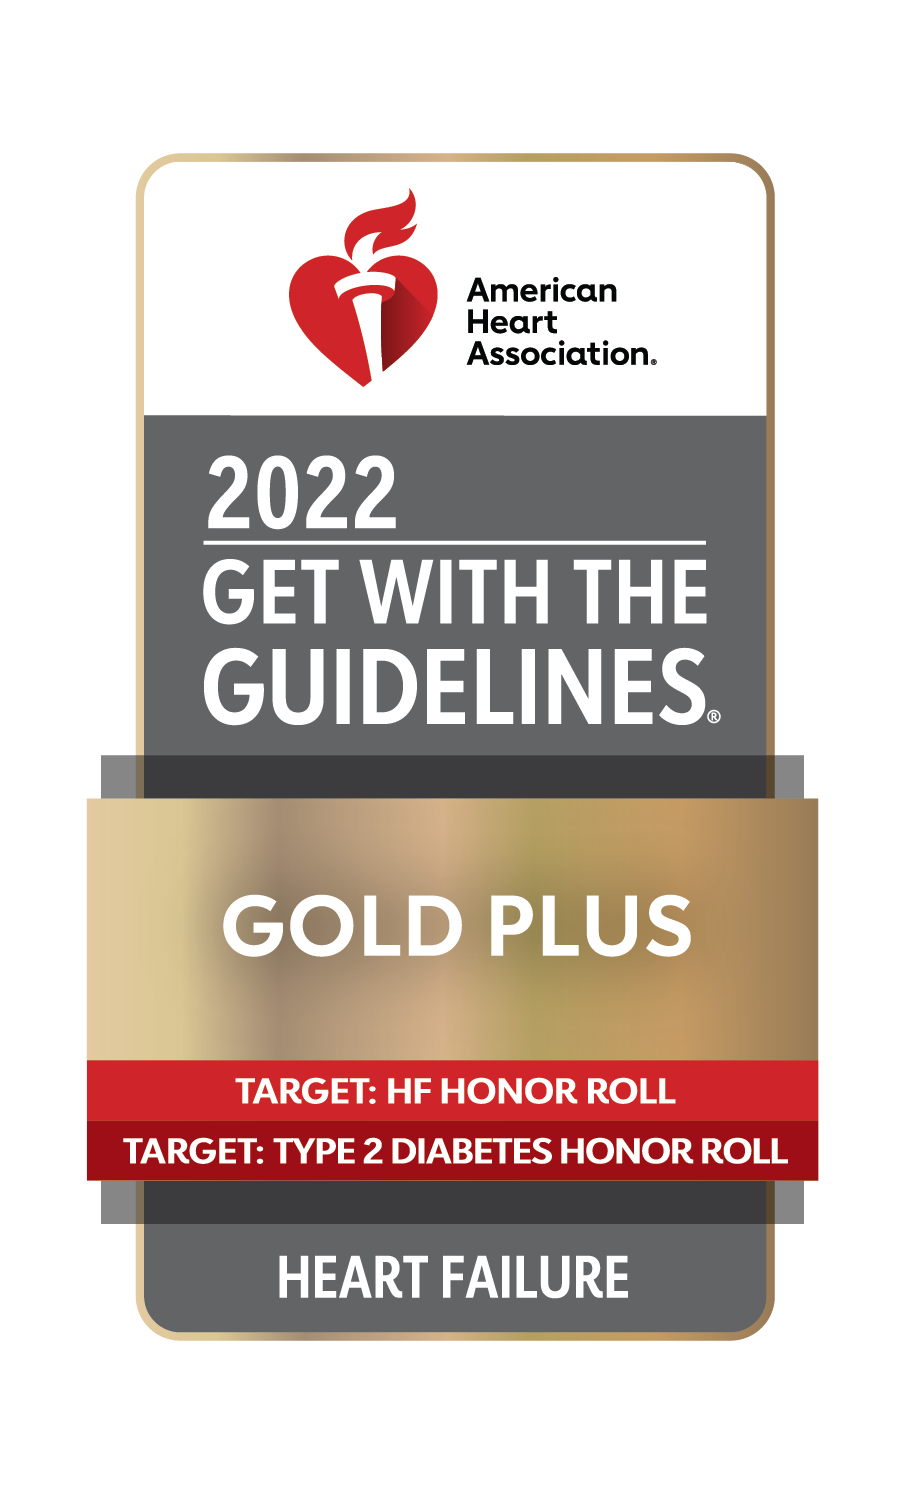 2022 GWTG_Gold Plus_Target HF Honor Roll_Target Type 2 Diabetes Honor Roll_Heart Failure